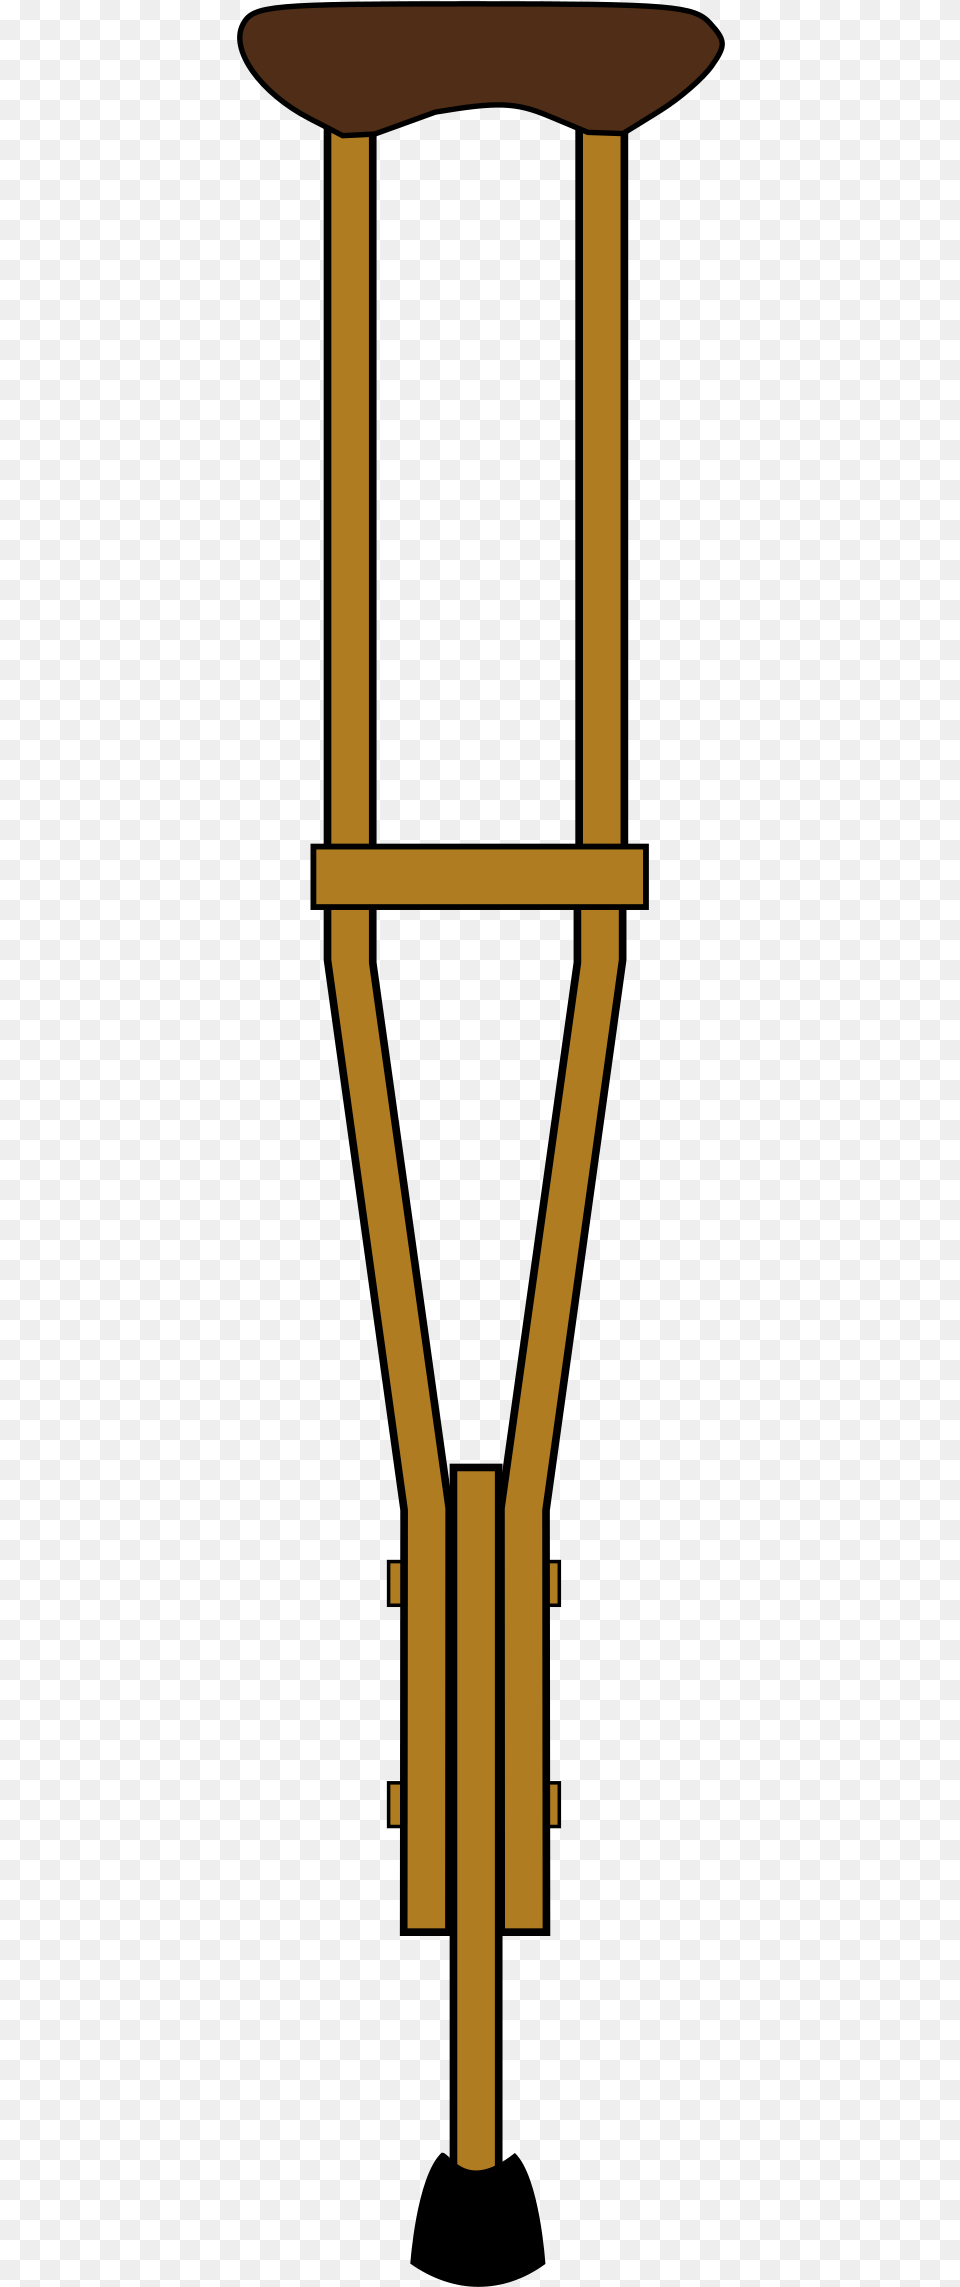 This Icons Design Of Wooden Crutch, Architecture, Building, Tower, Water Tower Free Png